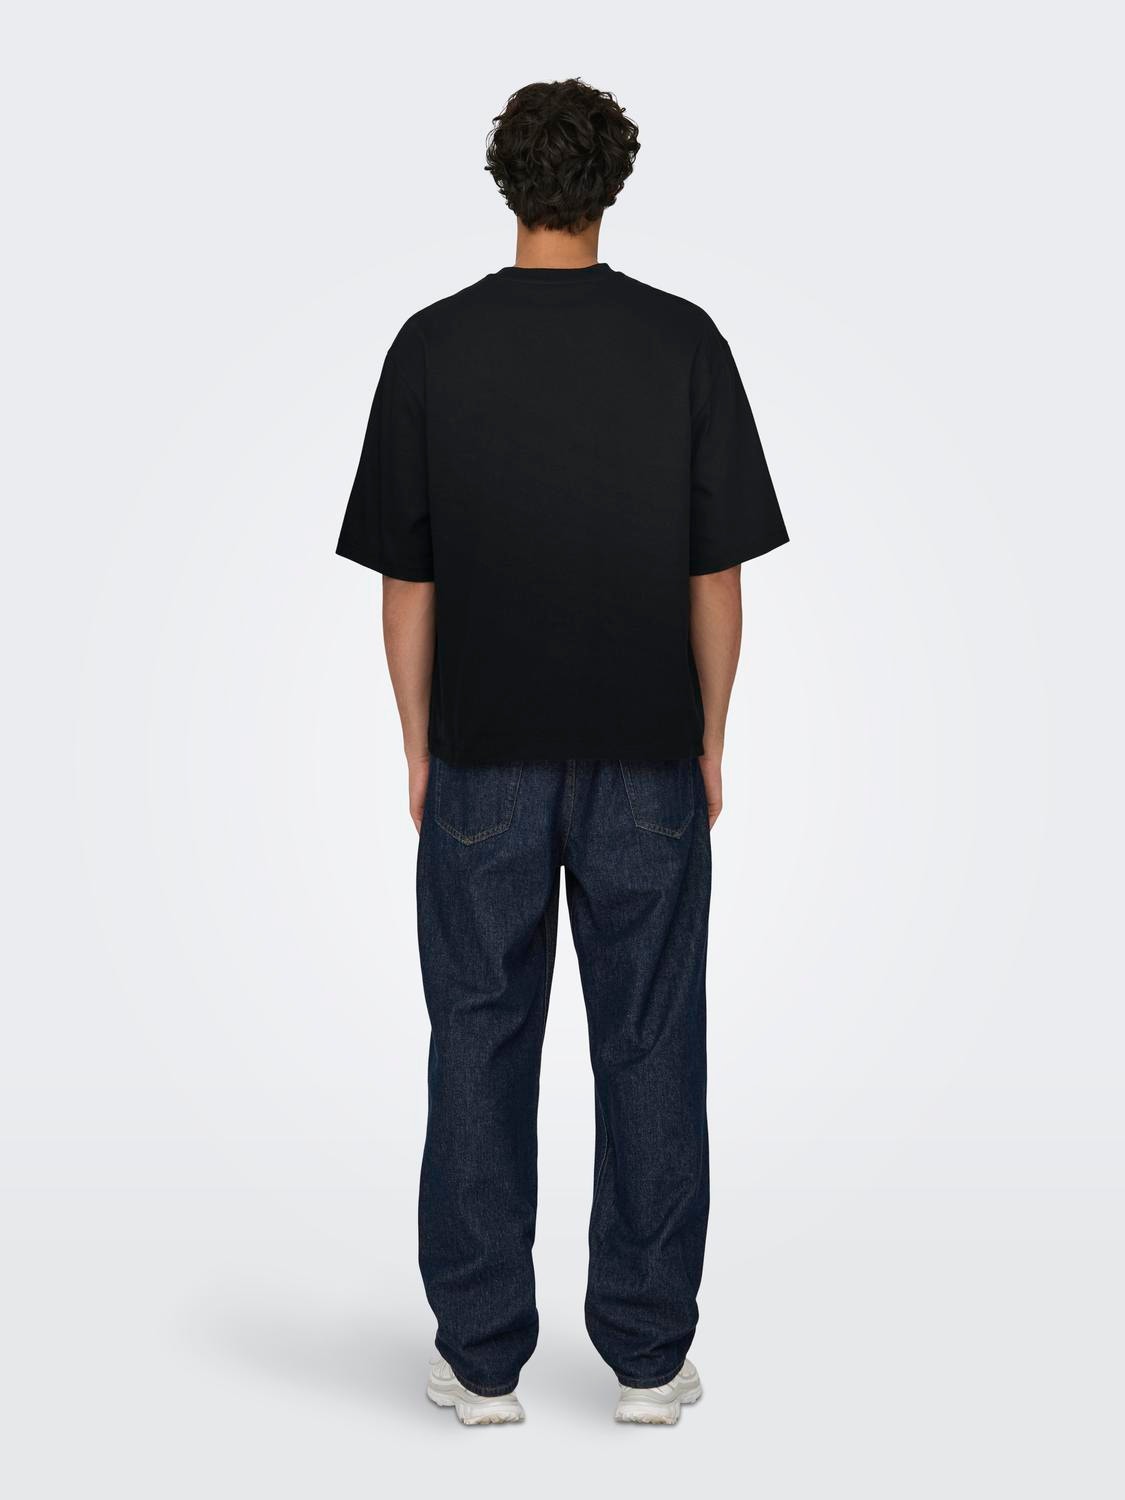 ONLY & SONS O-neck t-shirt -Black - 22027787